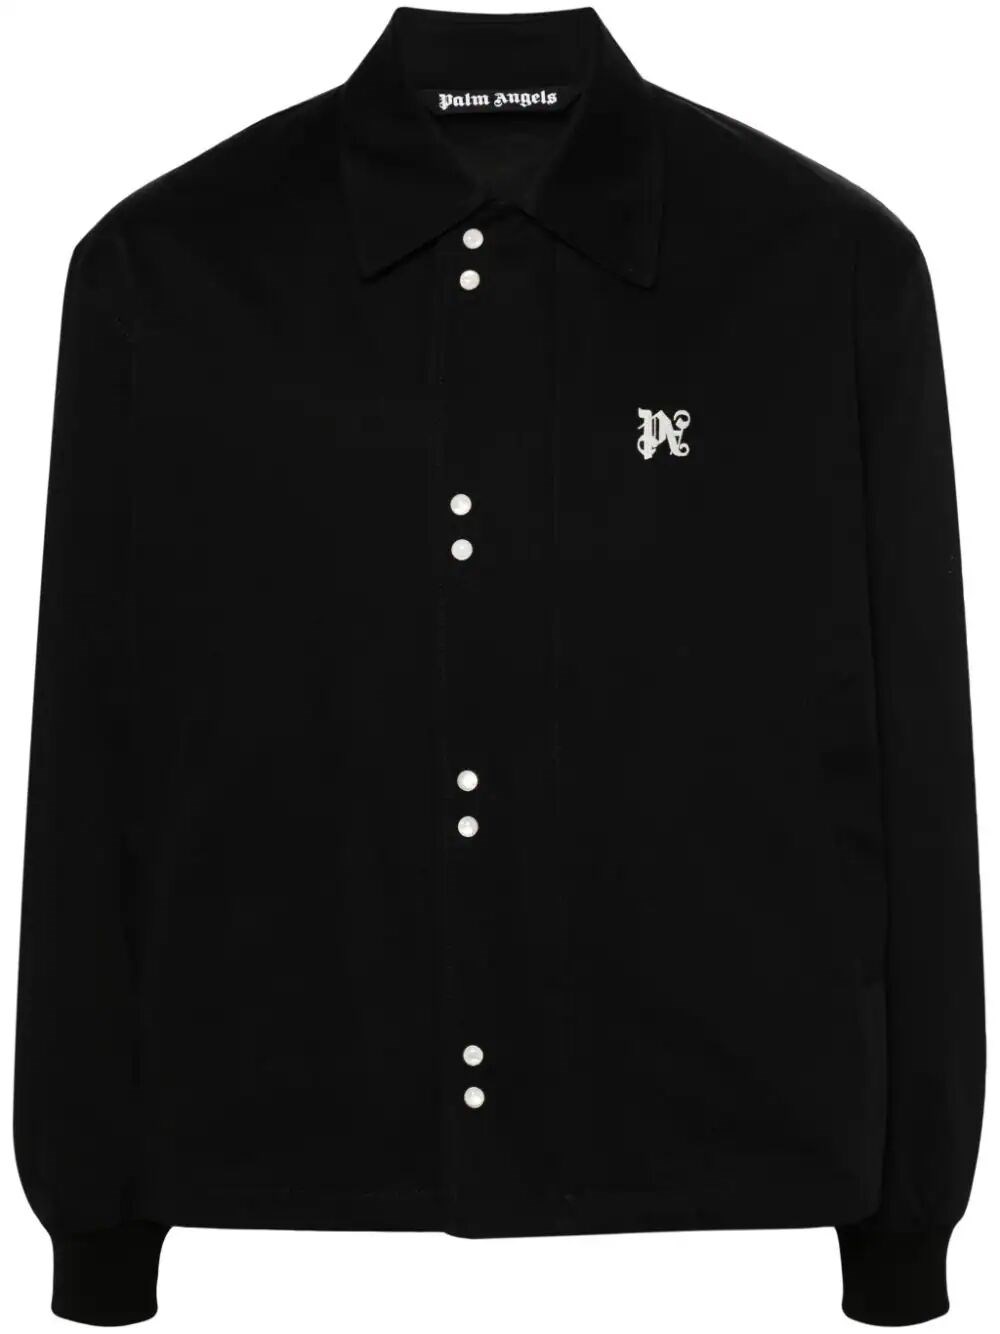 Palm Angels Black Cotton Embroidered Logo